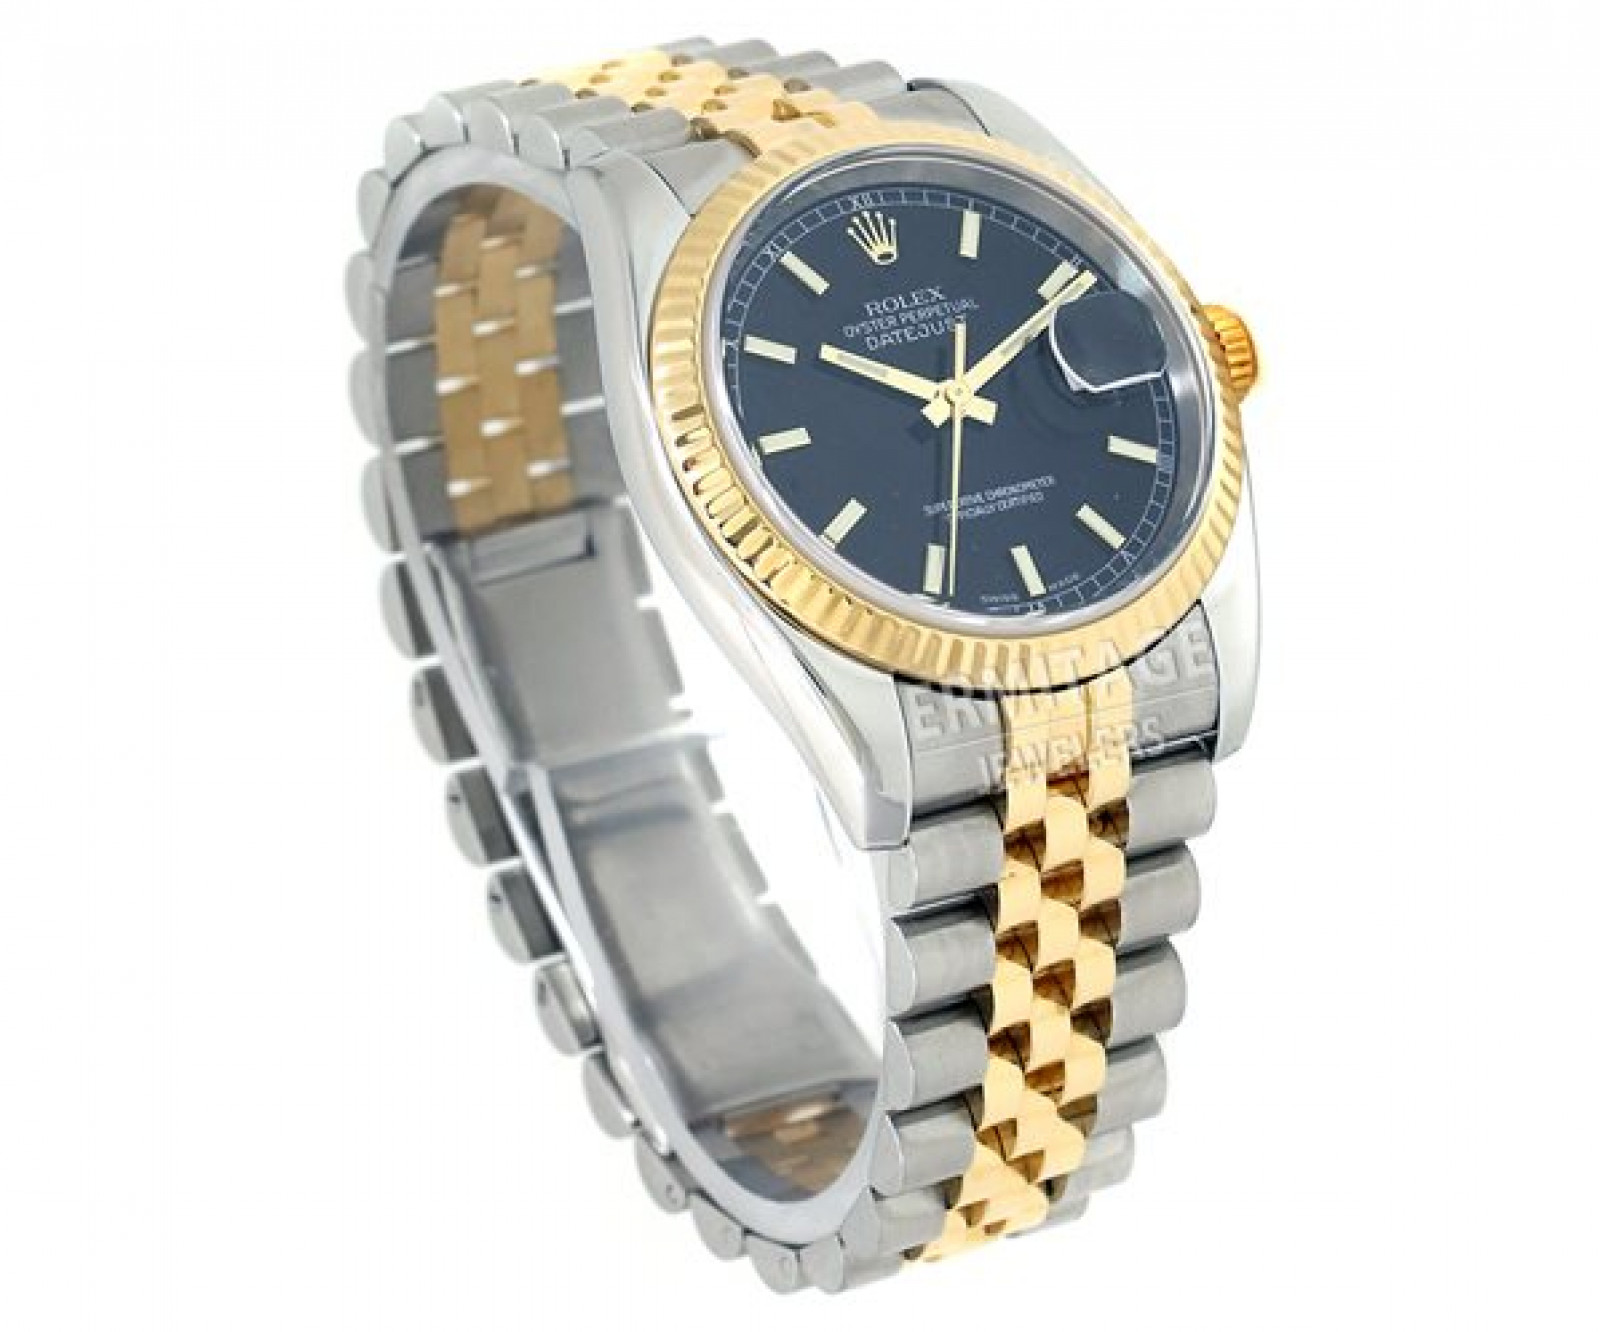 Pre-Owned Rolex Datejust 116233 Gold & Steel Year 2005